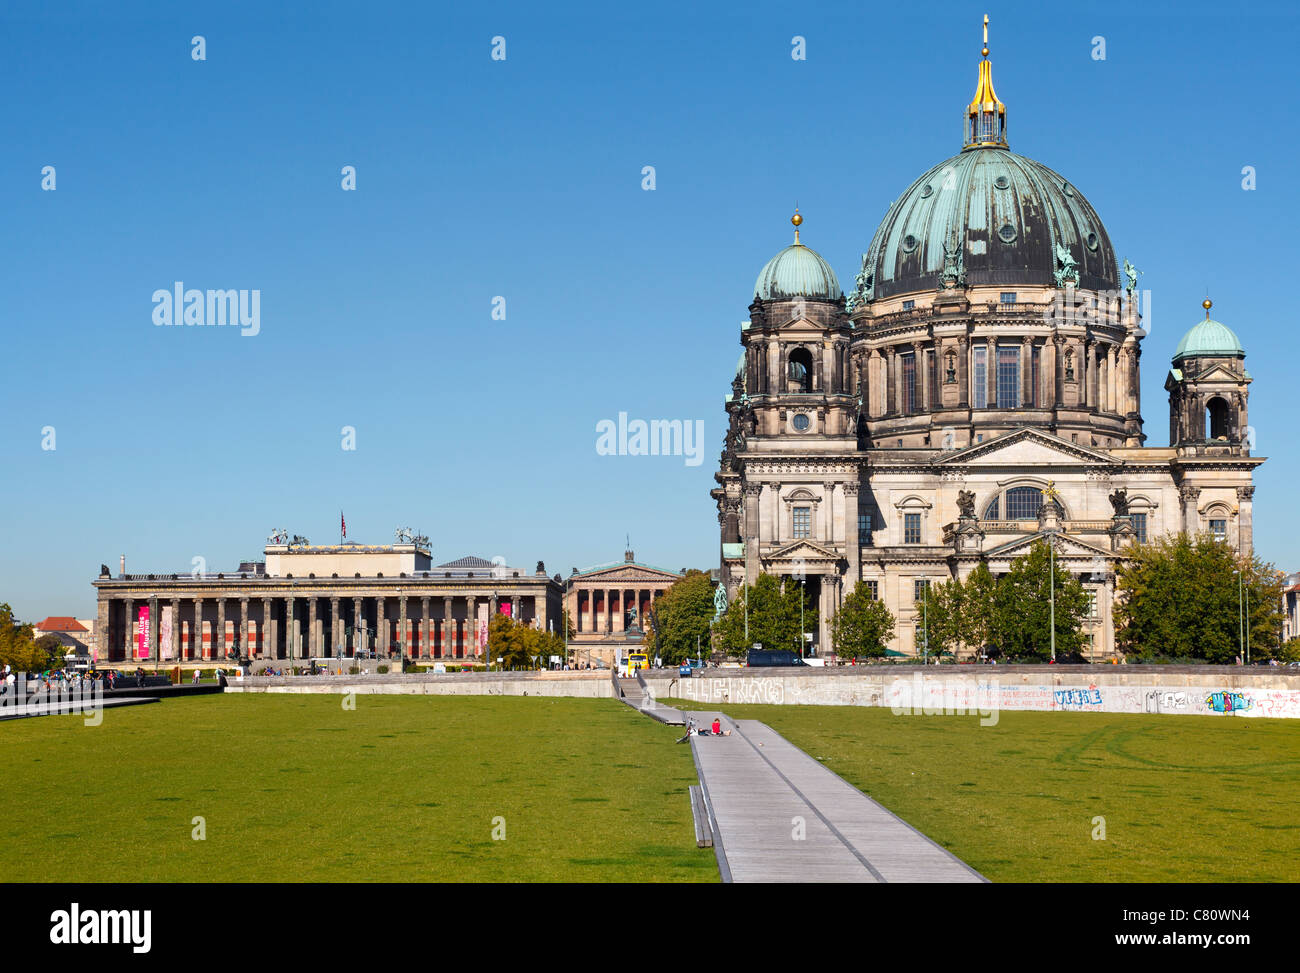 Museum Island from Schlossplatz, with Berliner Dom, Alte Nationalgalerie and Altes Museum, Berlin, Germany Stock Photo